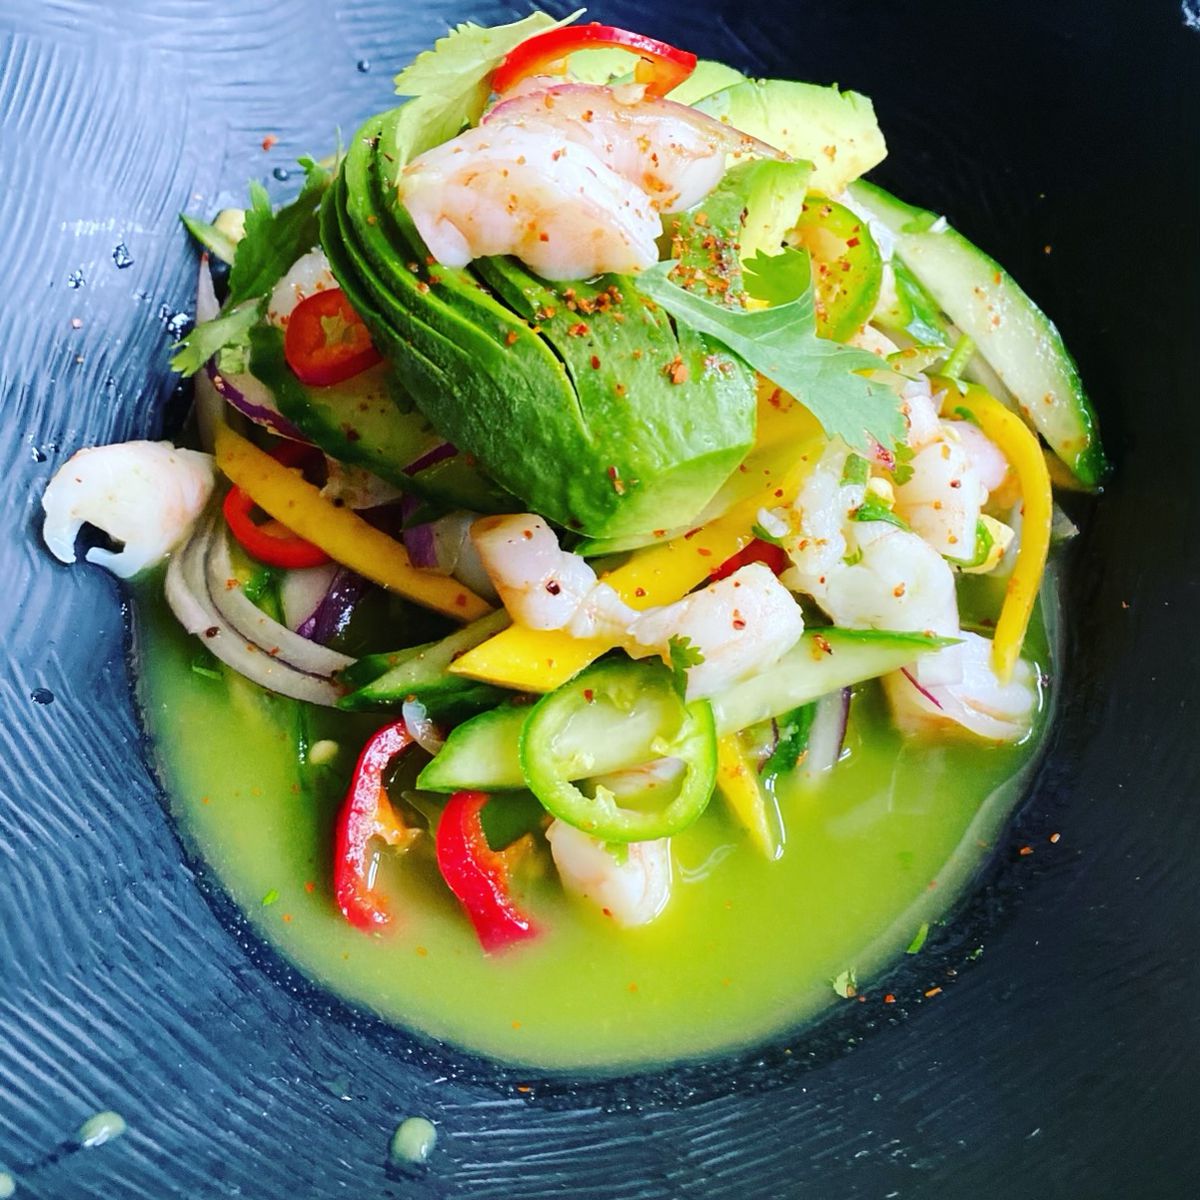 Shrimp ceviche with avocado and vegetables in a green sauce in a black bowl.